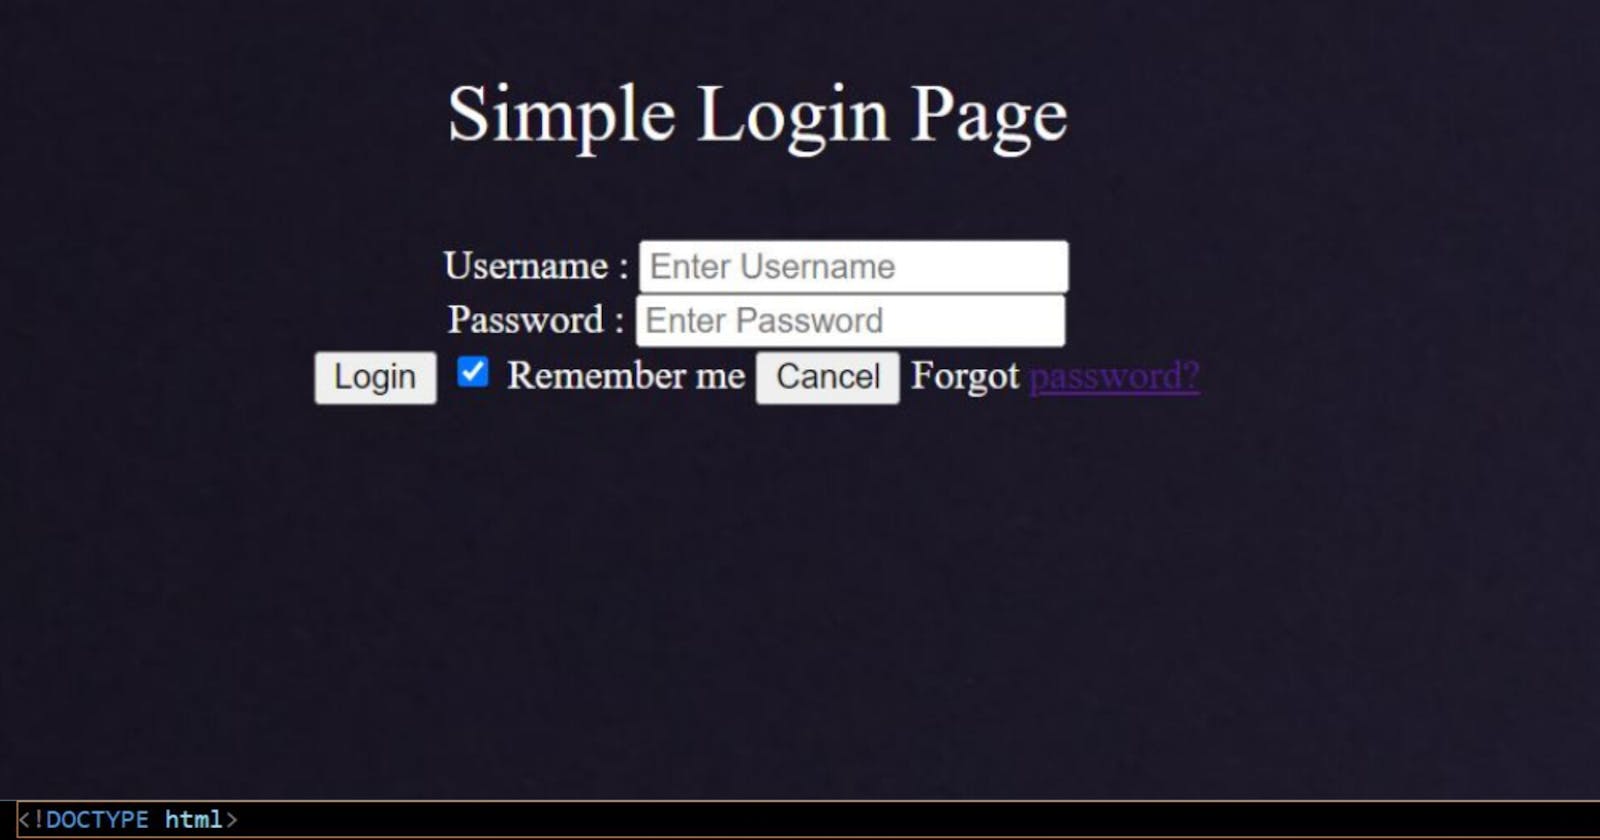 Simple login page using HTML: